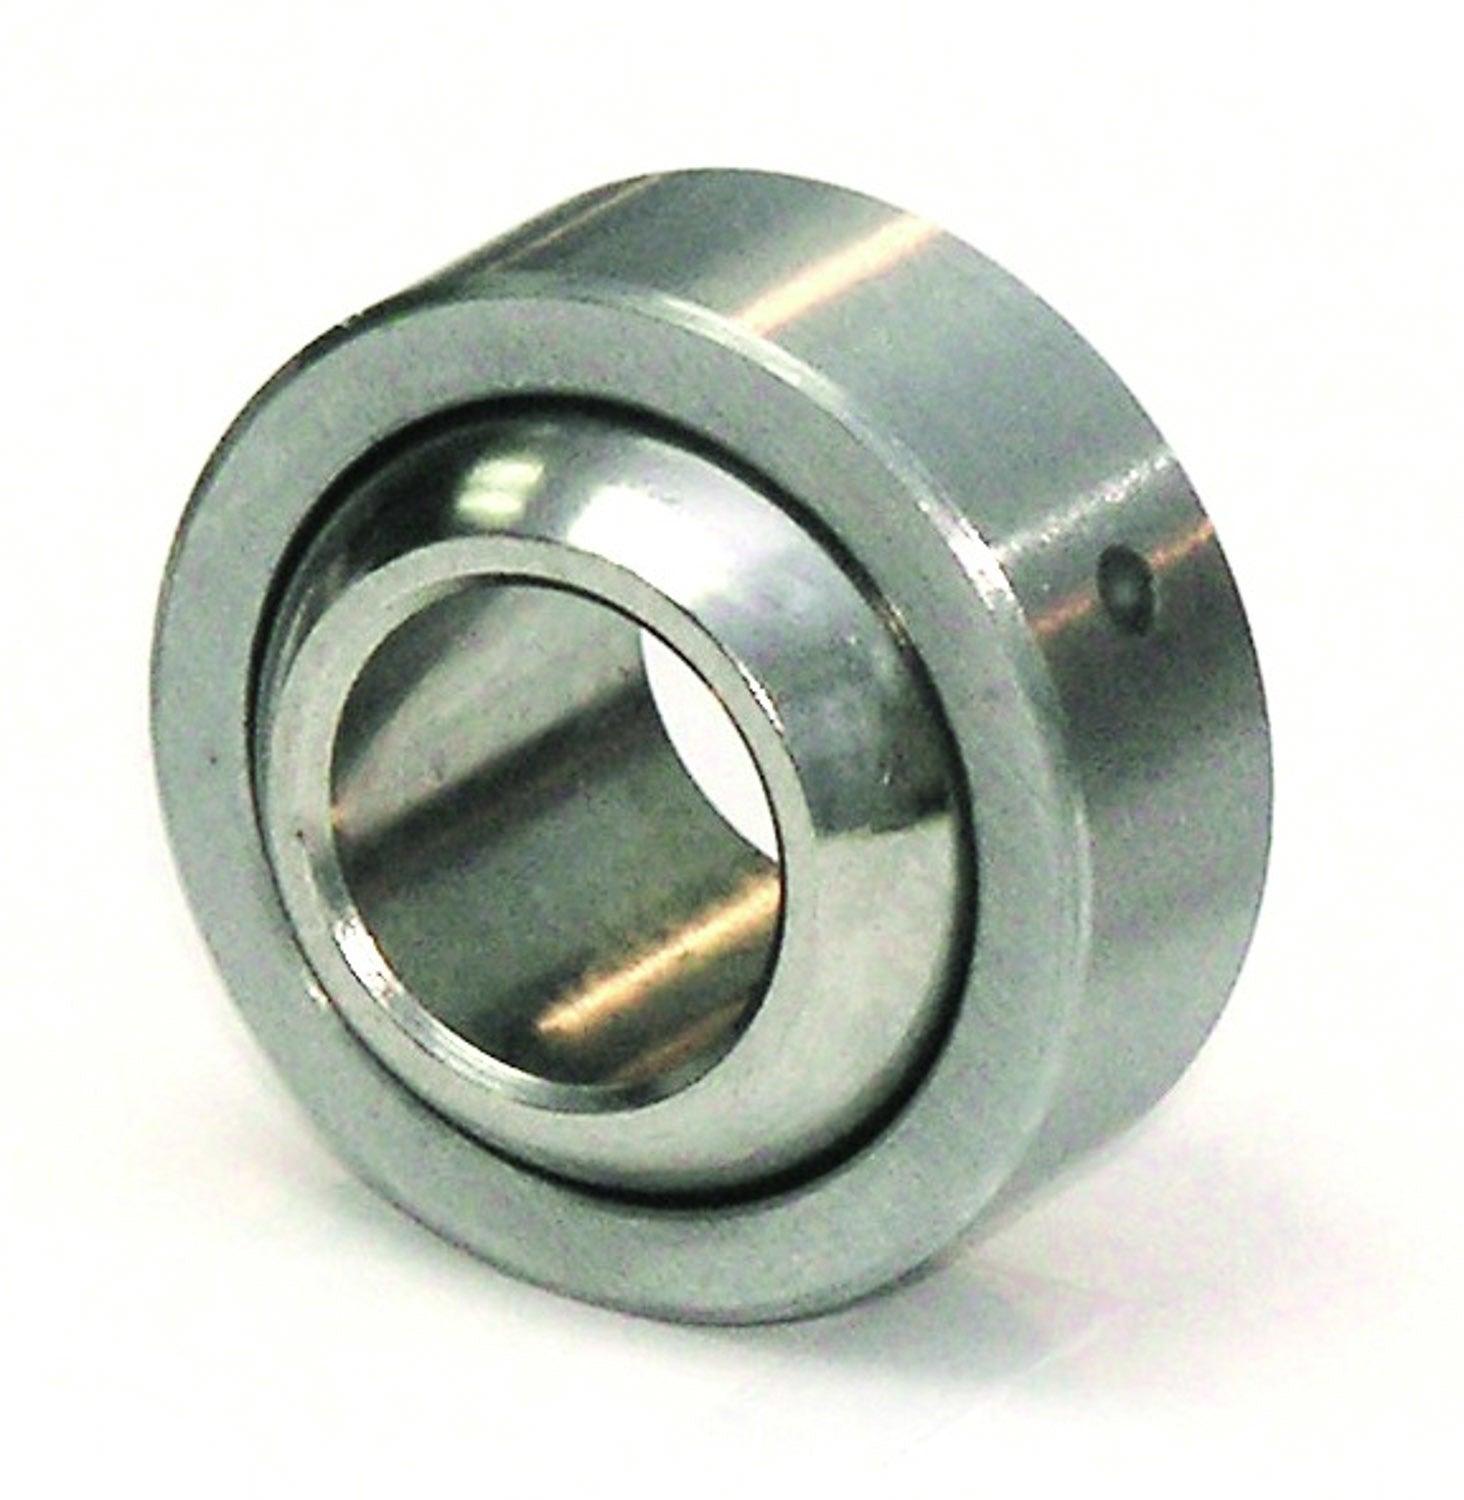 Repl Bearing and Clips for Gas Shock - Burlile Performance Products